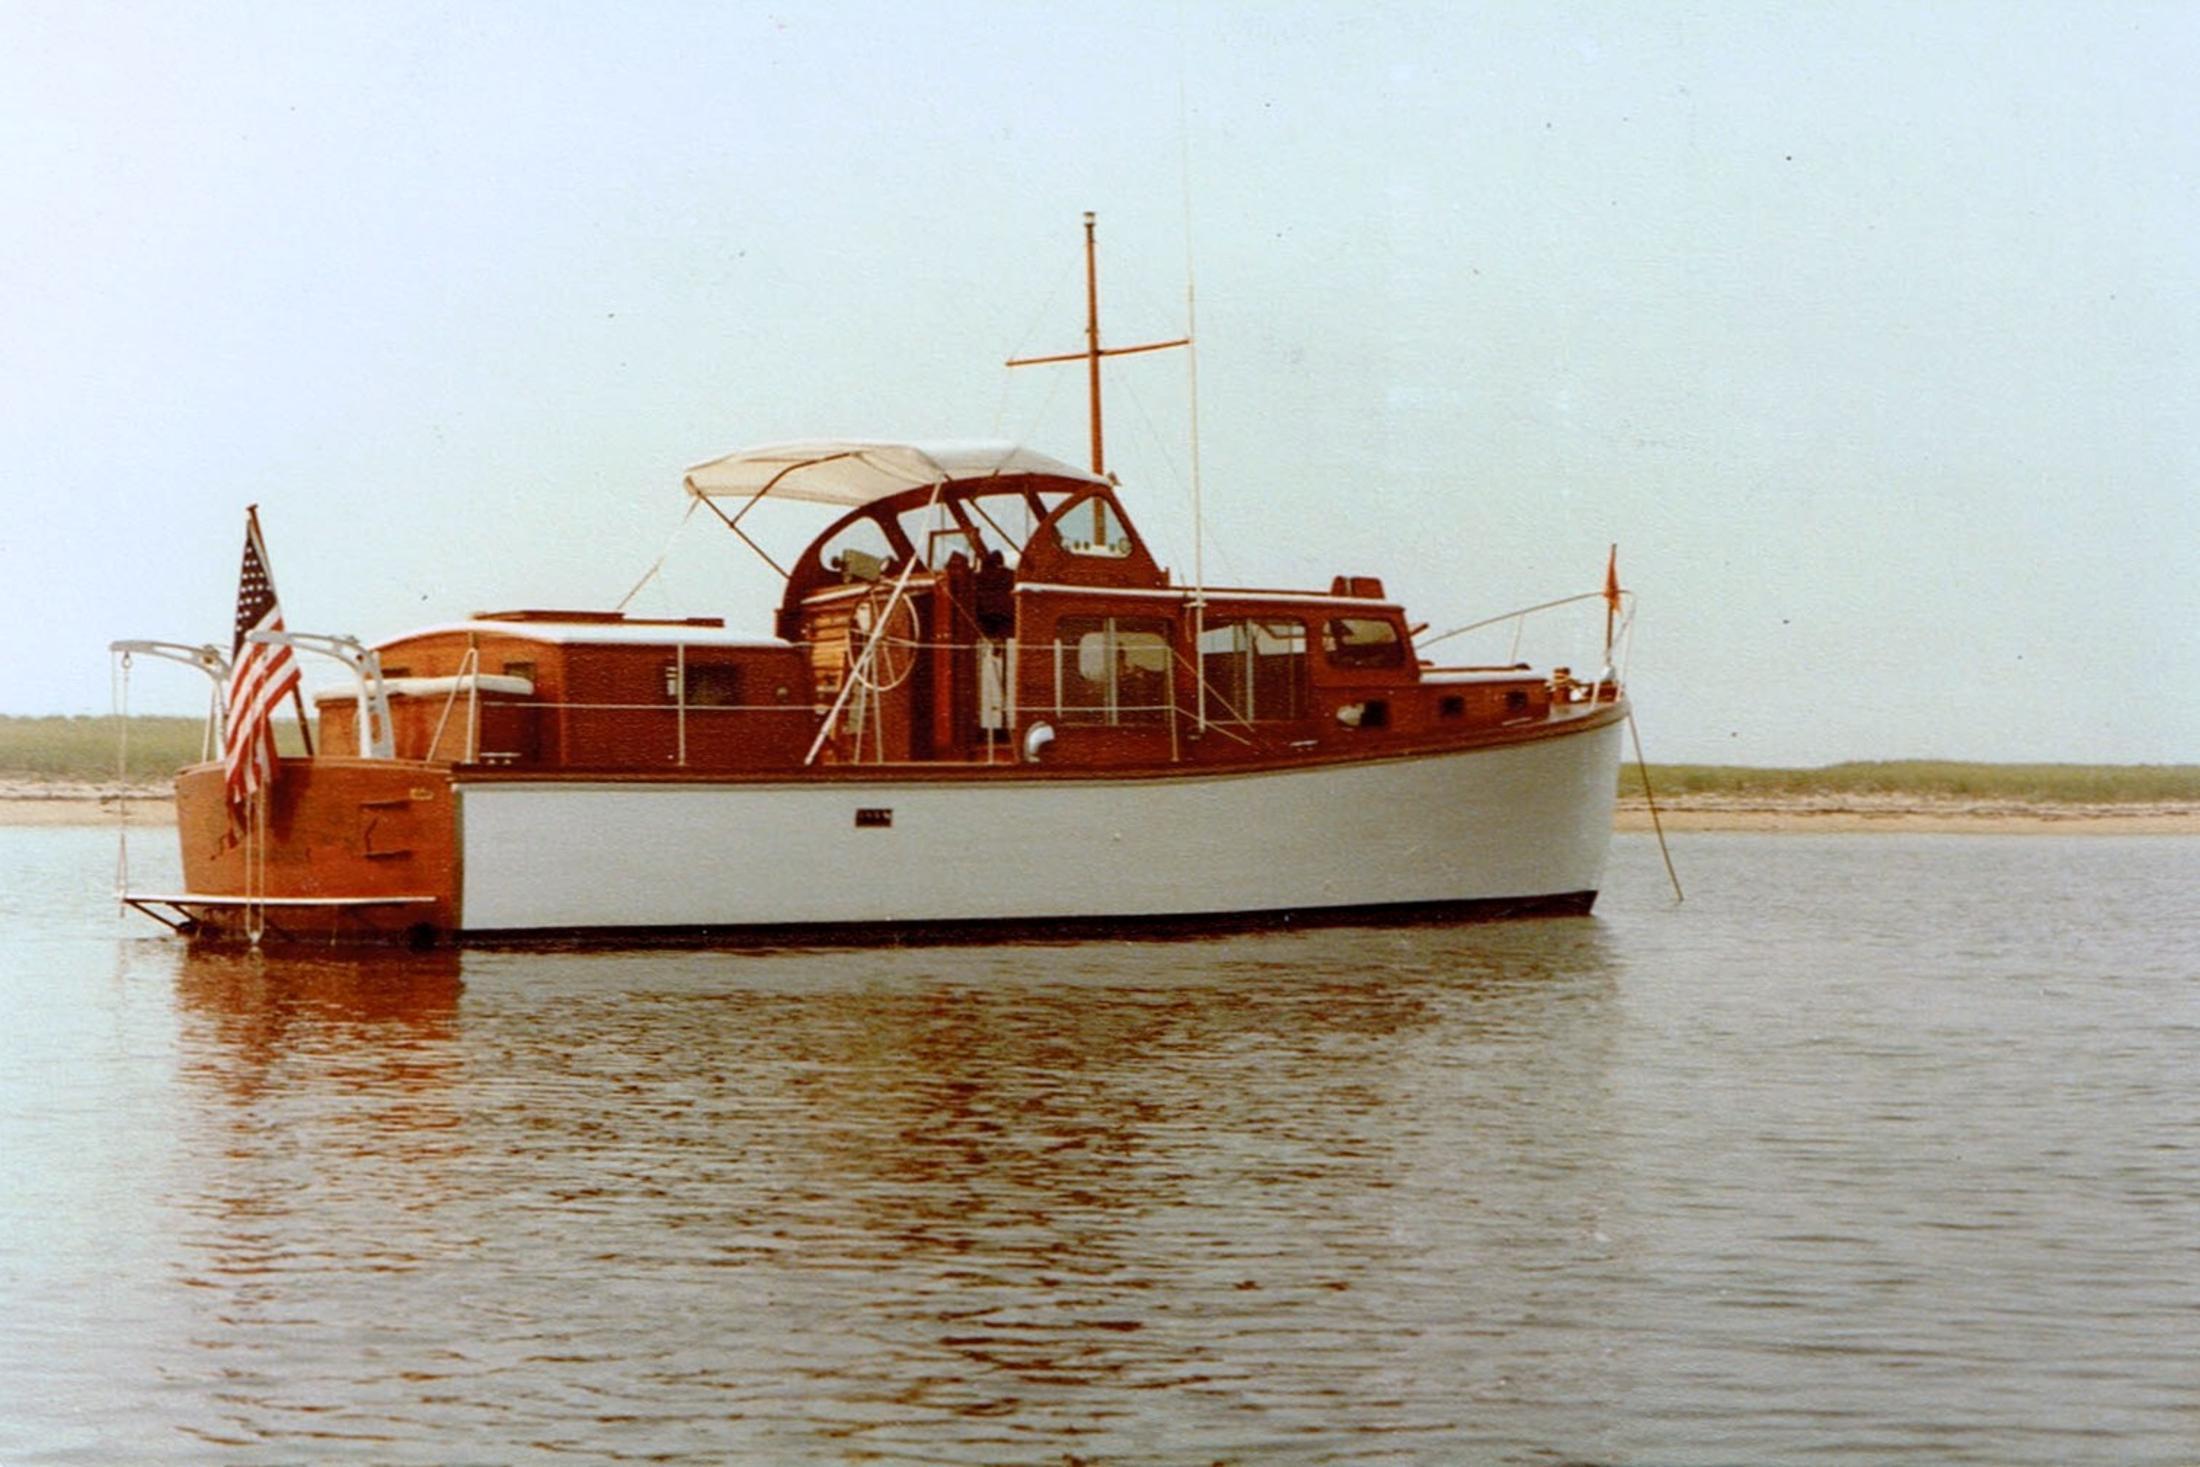 Classic Hatteras Motor Yacht, Lyme